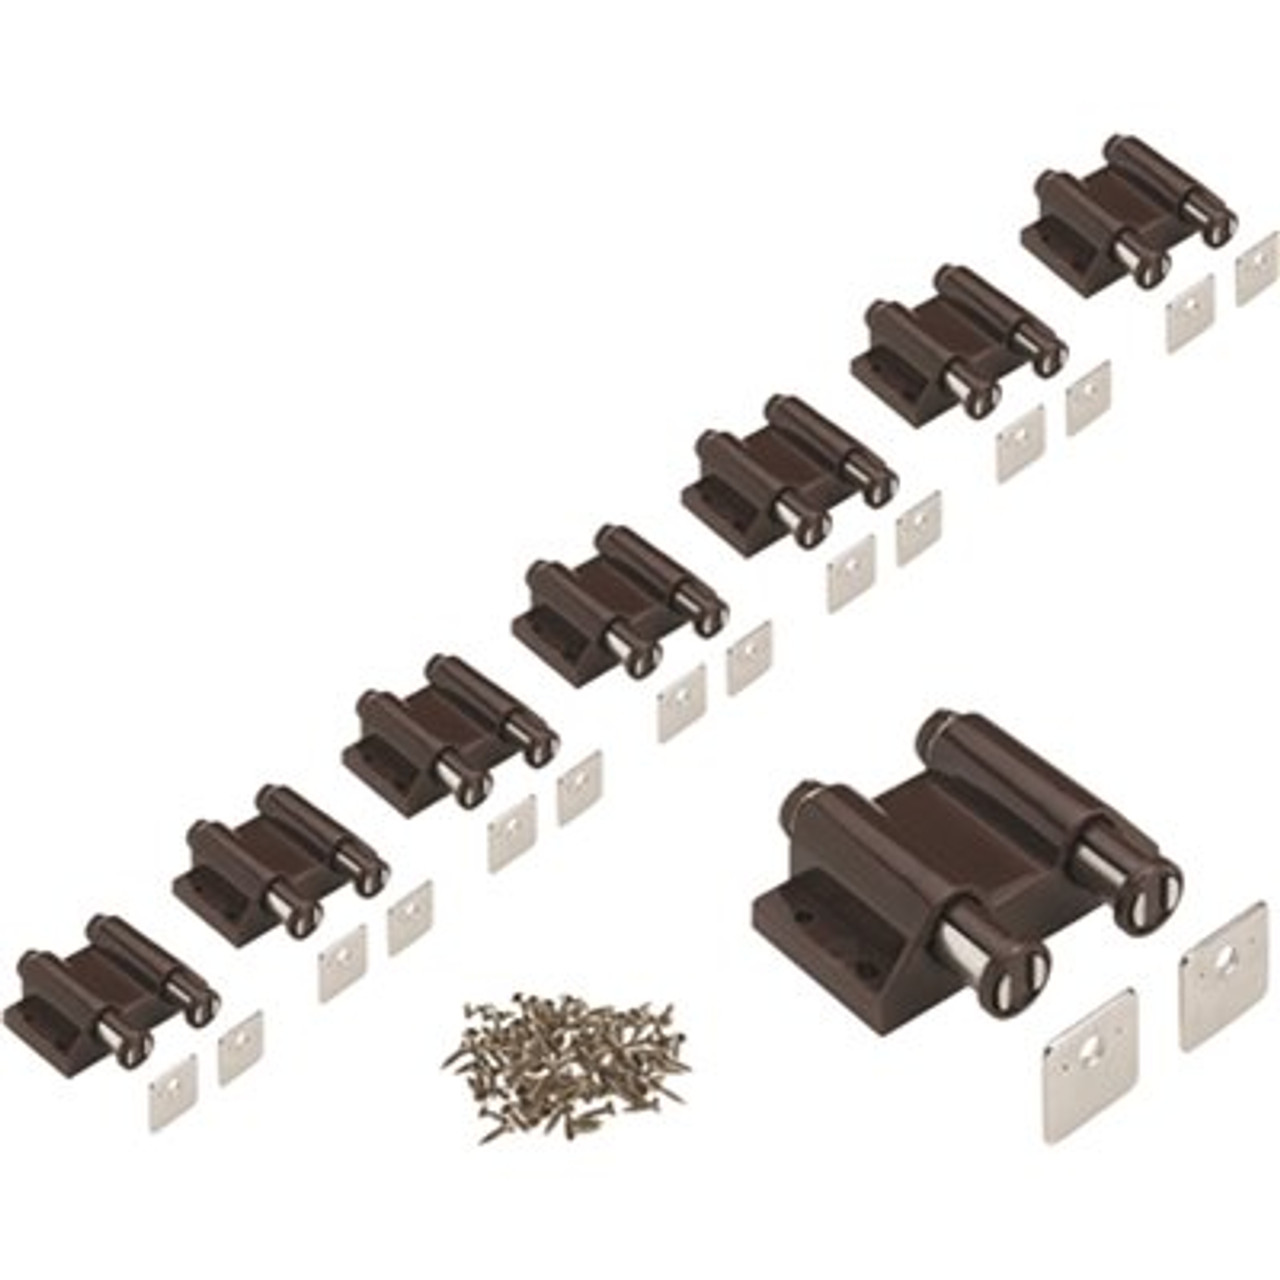 Everbilt Brown Double Magnetic Touch Door Latch (12-Pack)